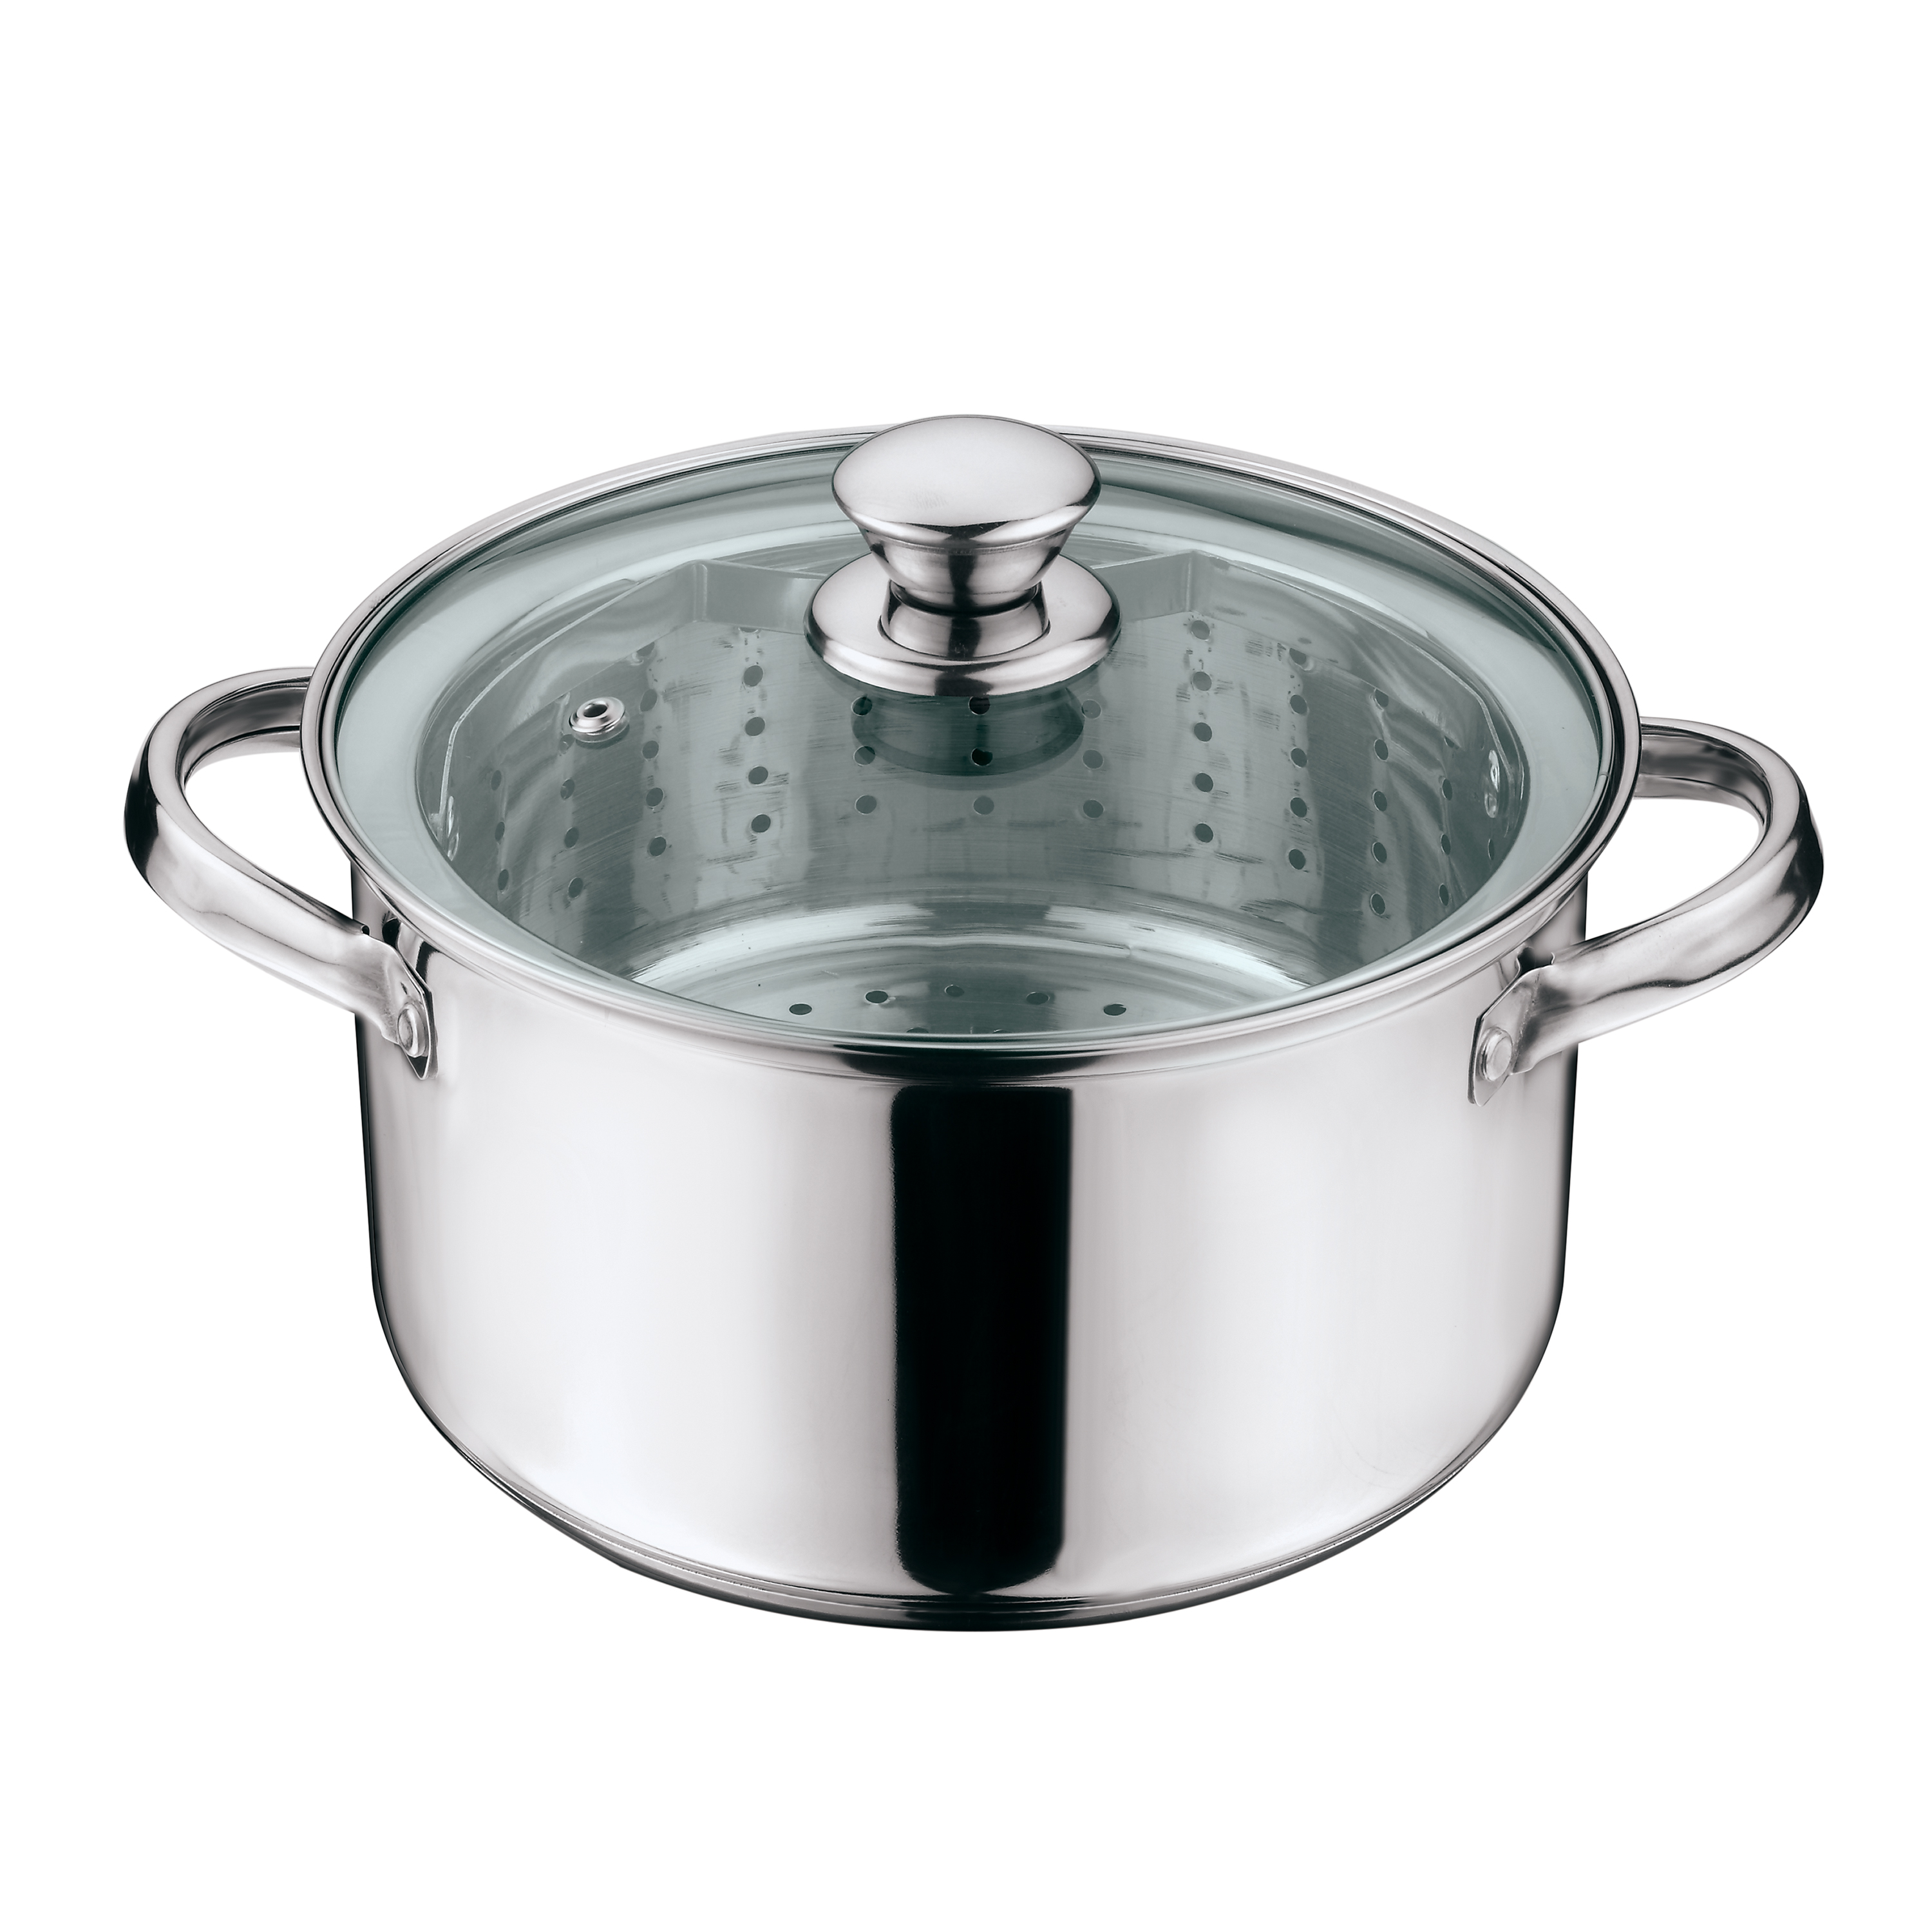 Mainstays Stainless Steel 4 Quart Steamer Pot with Steamer Insert and Lid - image 4 of 6